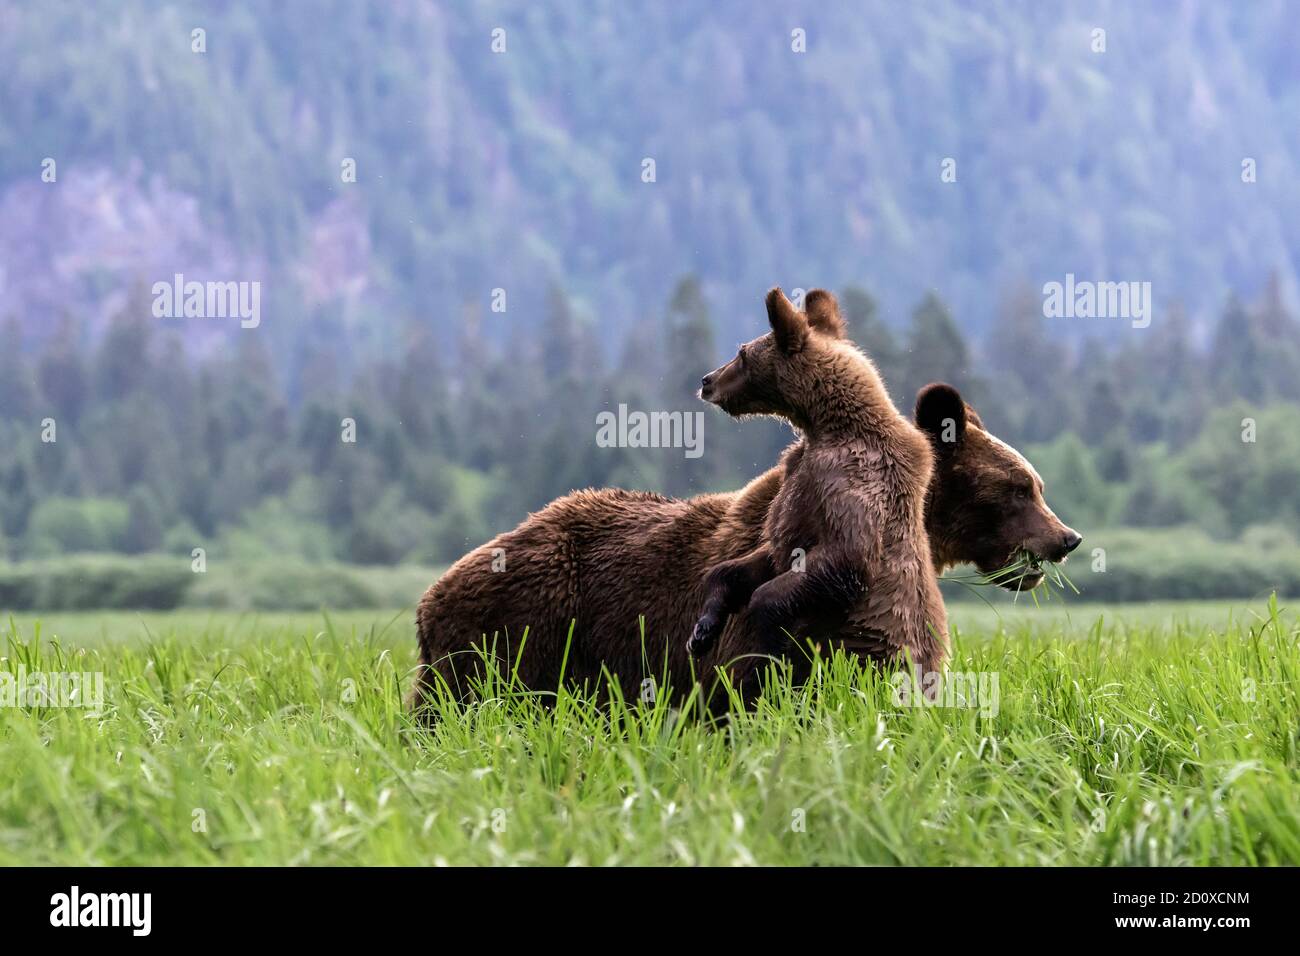 Grizzly cub keeping watch while mother eats sedge grass, Khutzeymateen, BC Stock Photo